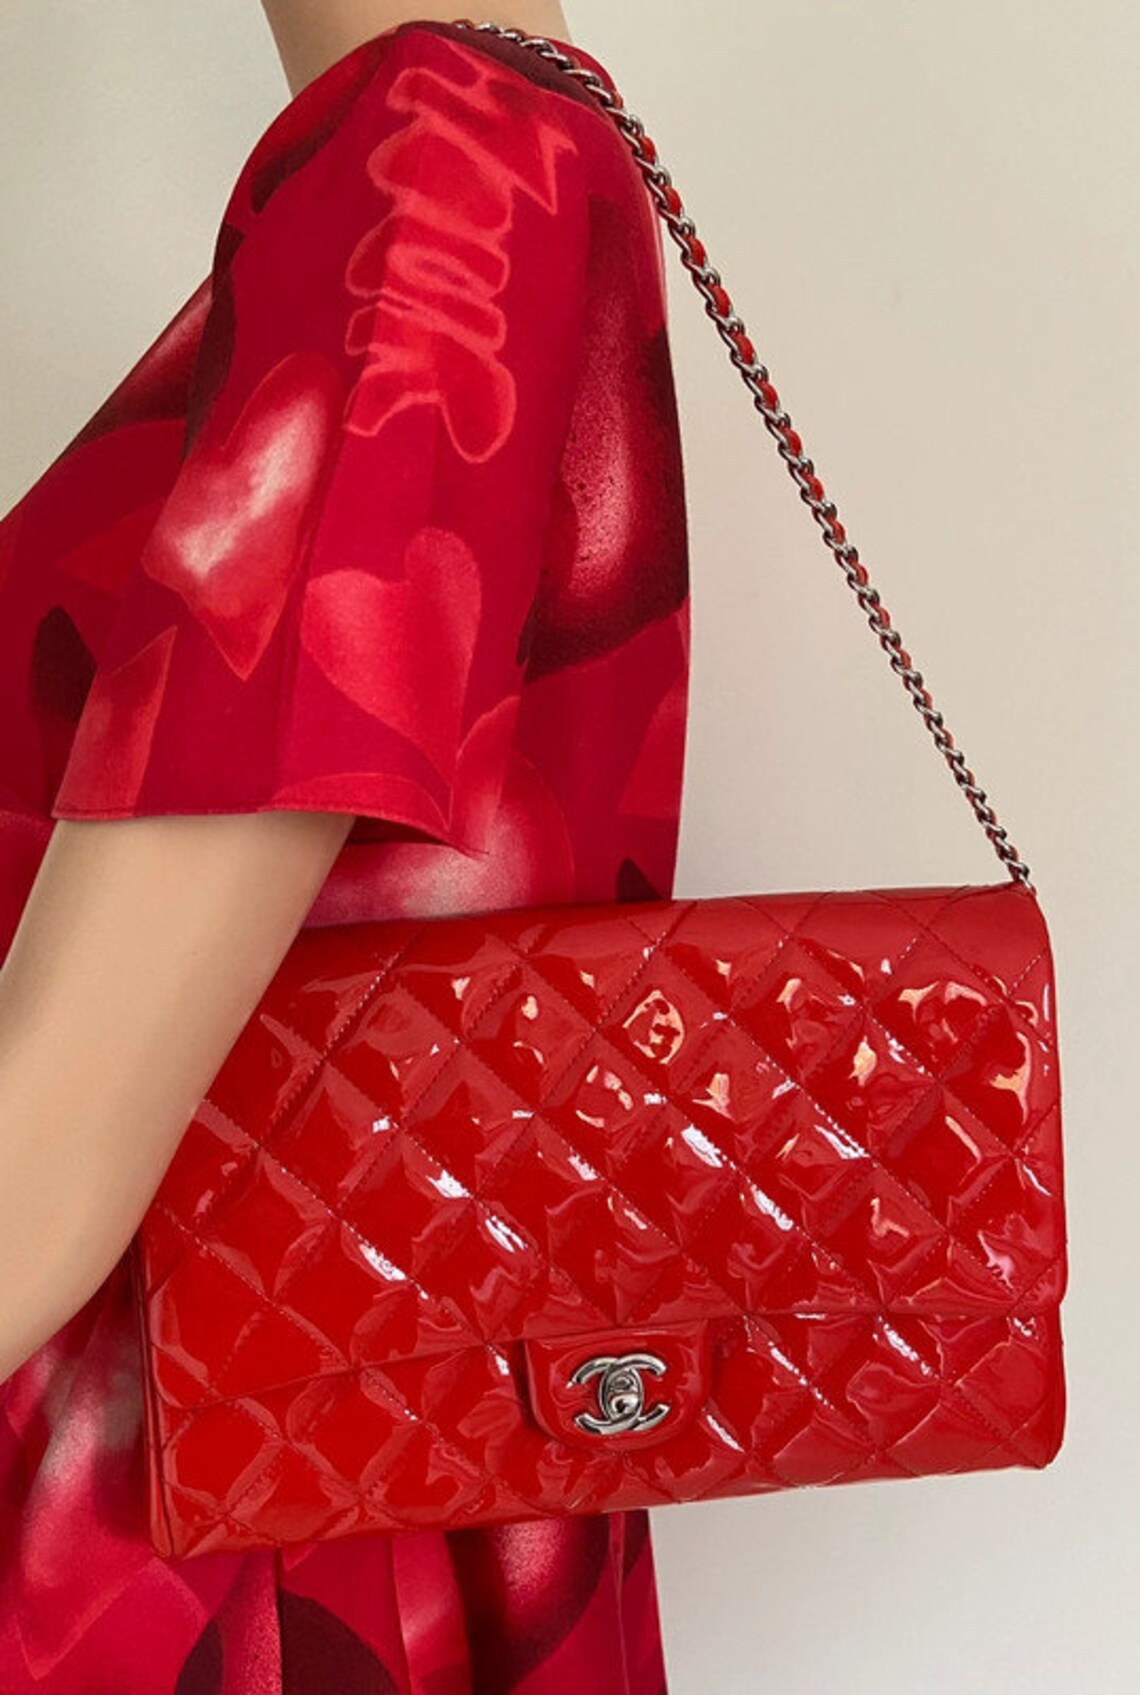 Chanel classic single flap bag in quilted red patent leather, shoulder  strap, Dustbag, very good condition CHANEL VINT46 : french-camera.fr luxury  vintage